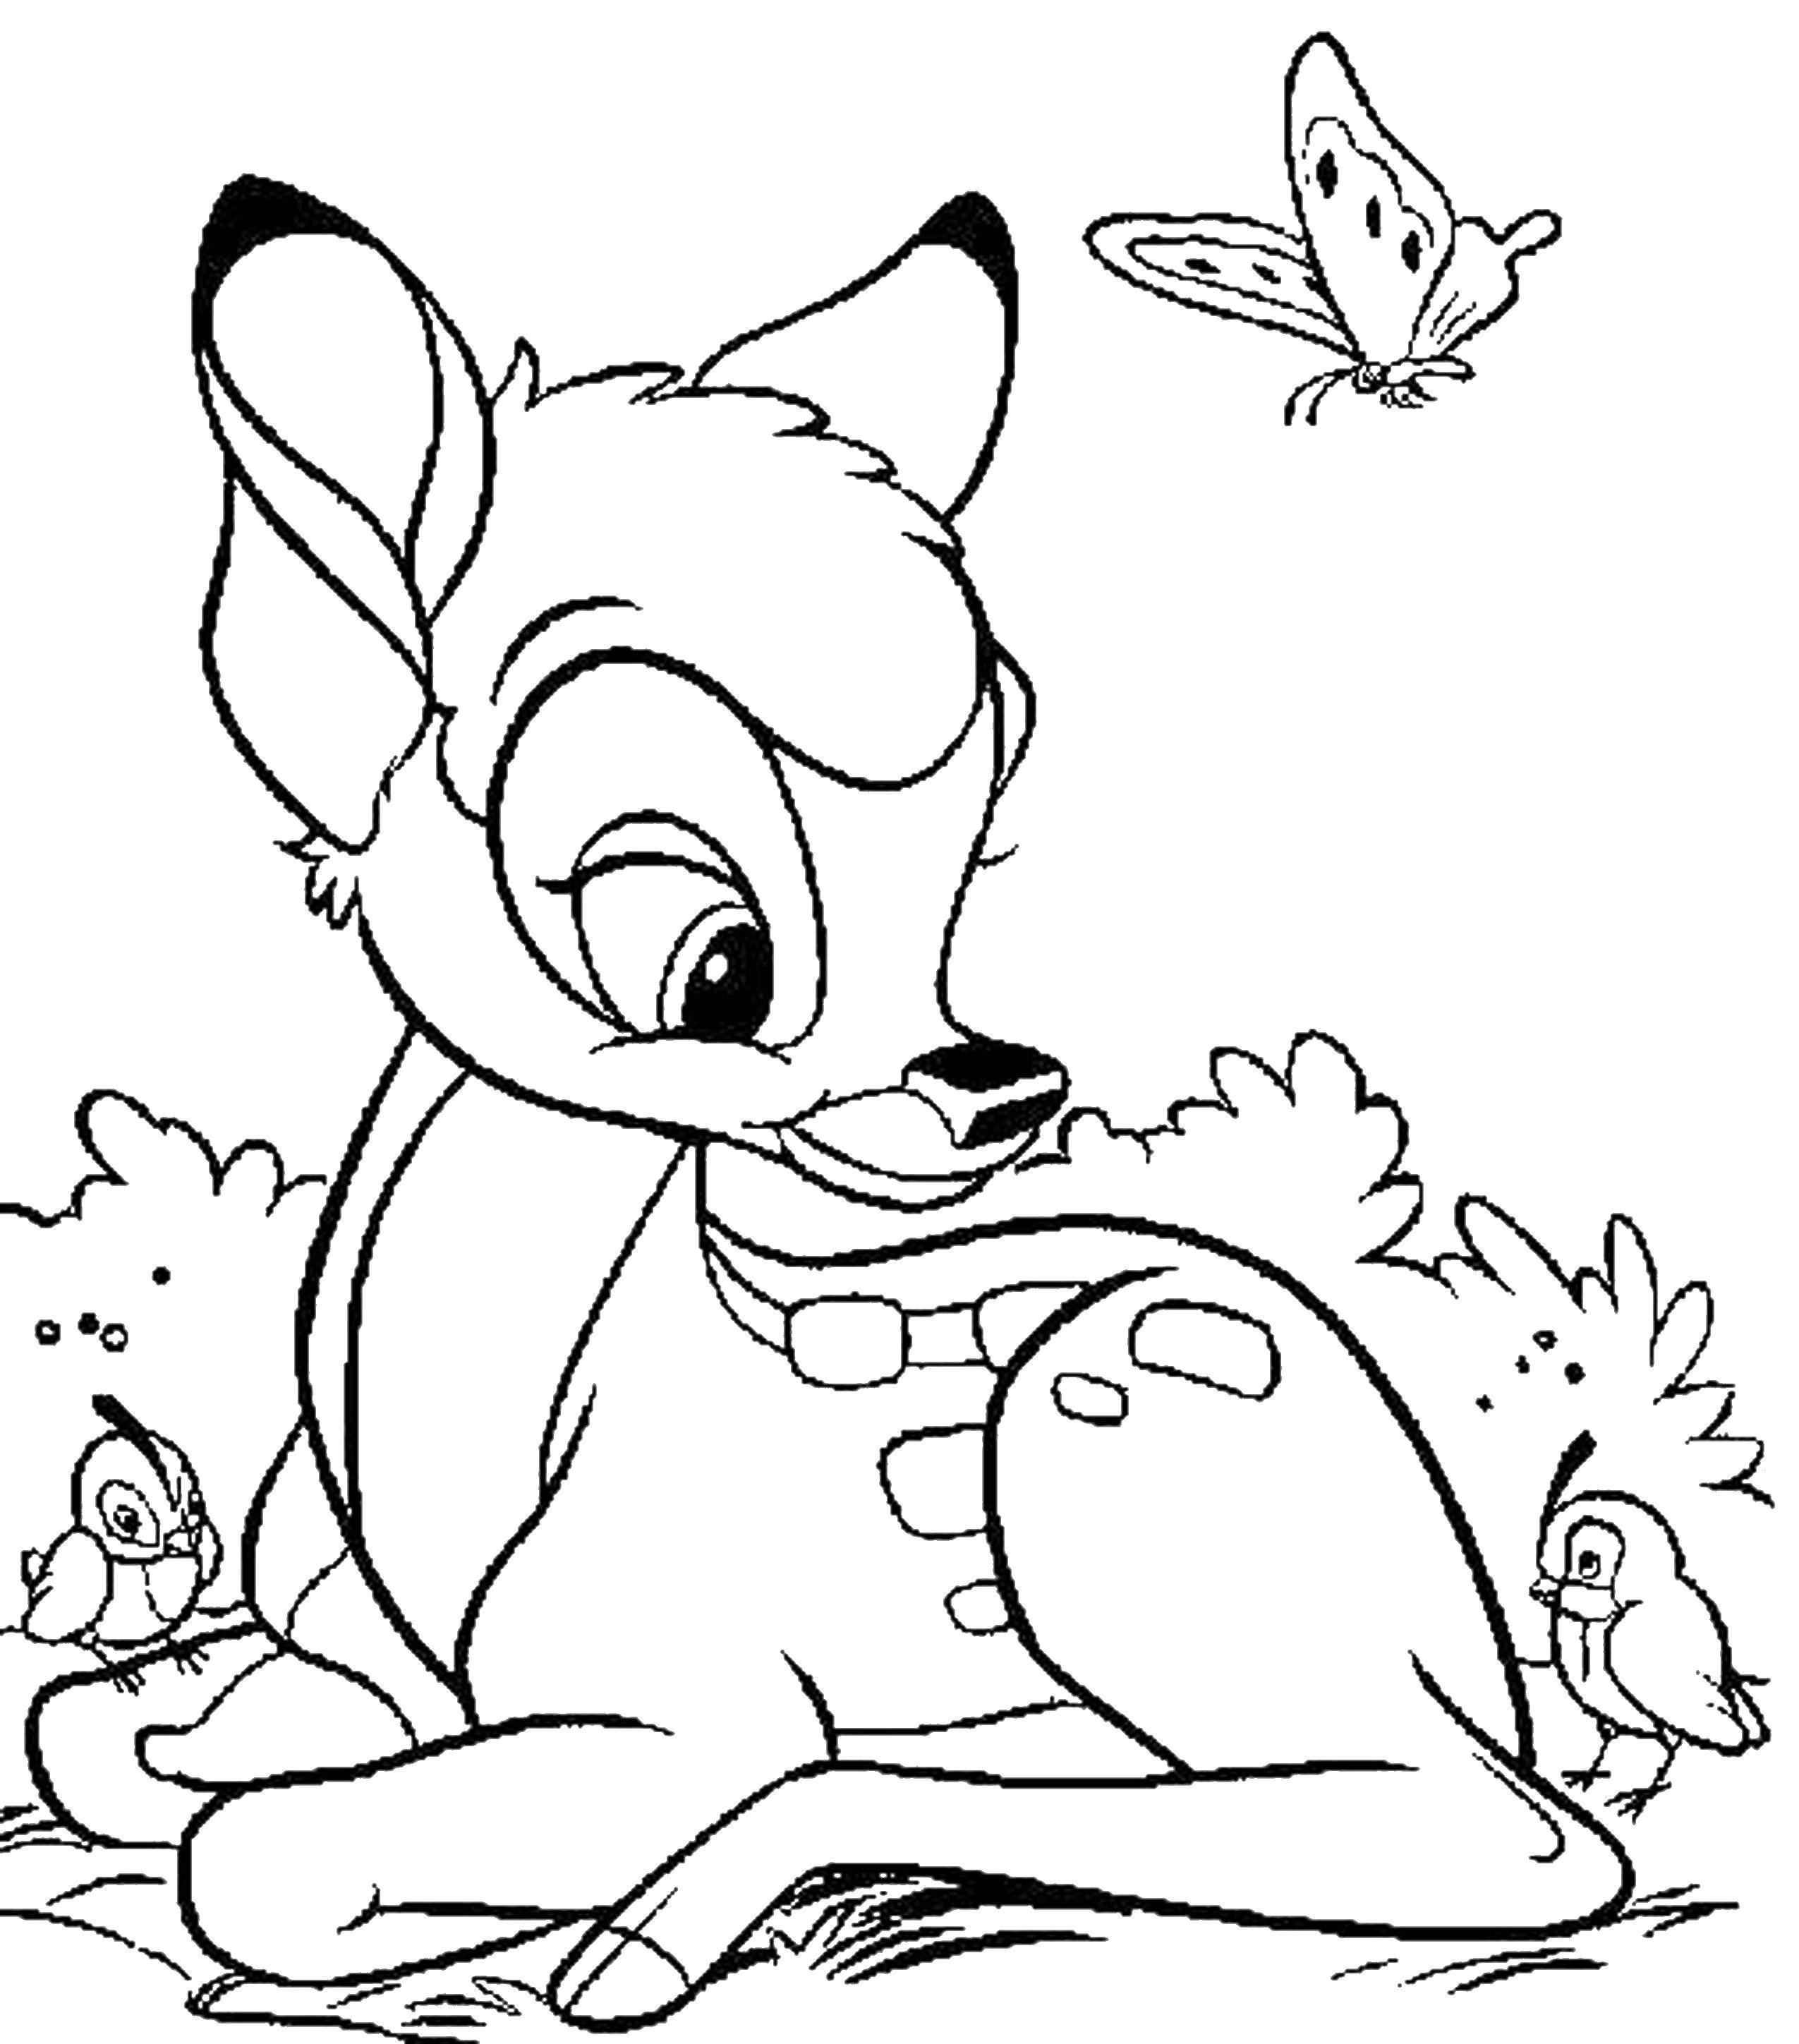 Coloring Bambi with his friends. Category Coloring pages for kids. Tags:  Disney, deer, Bambi.